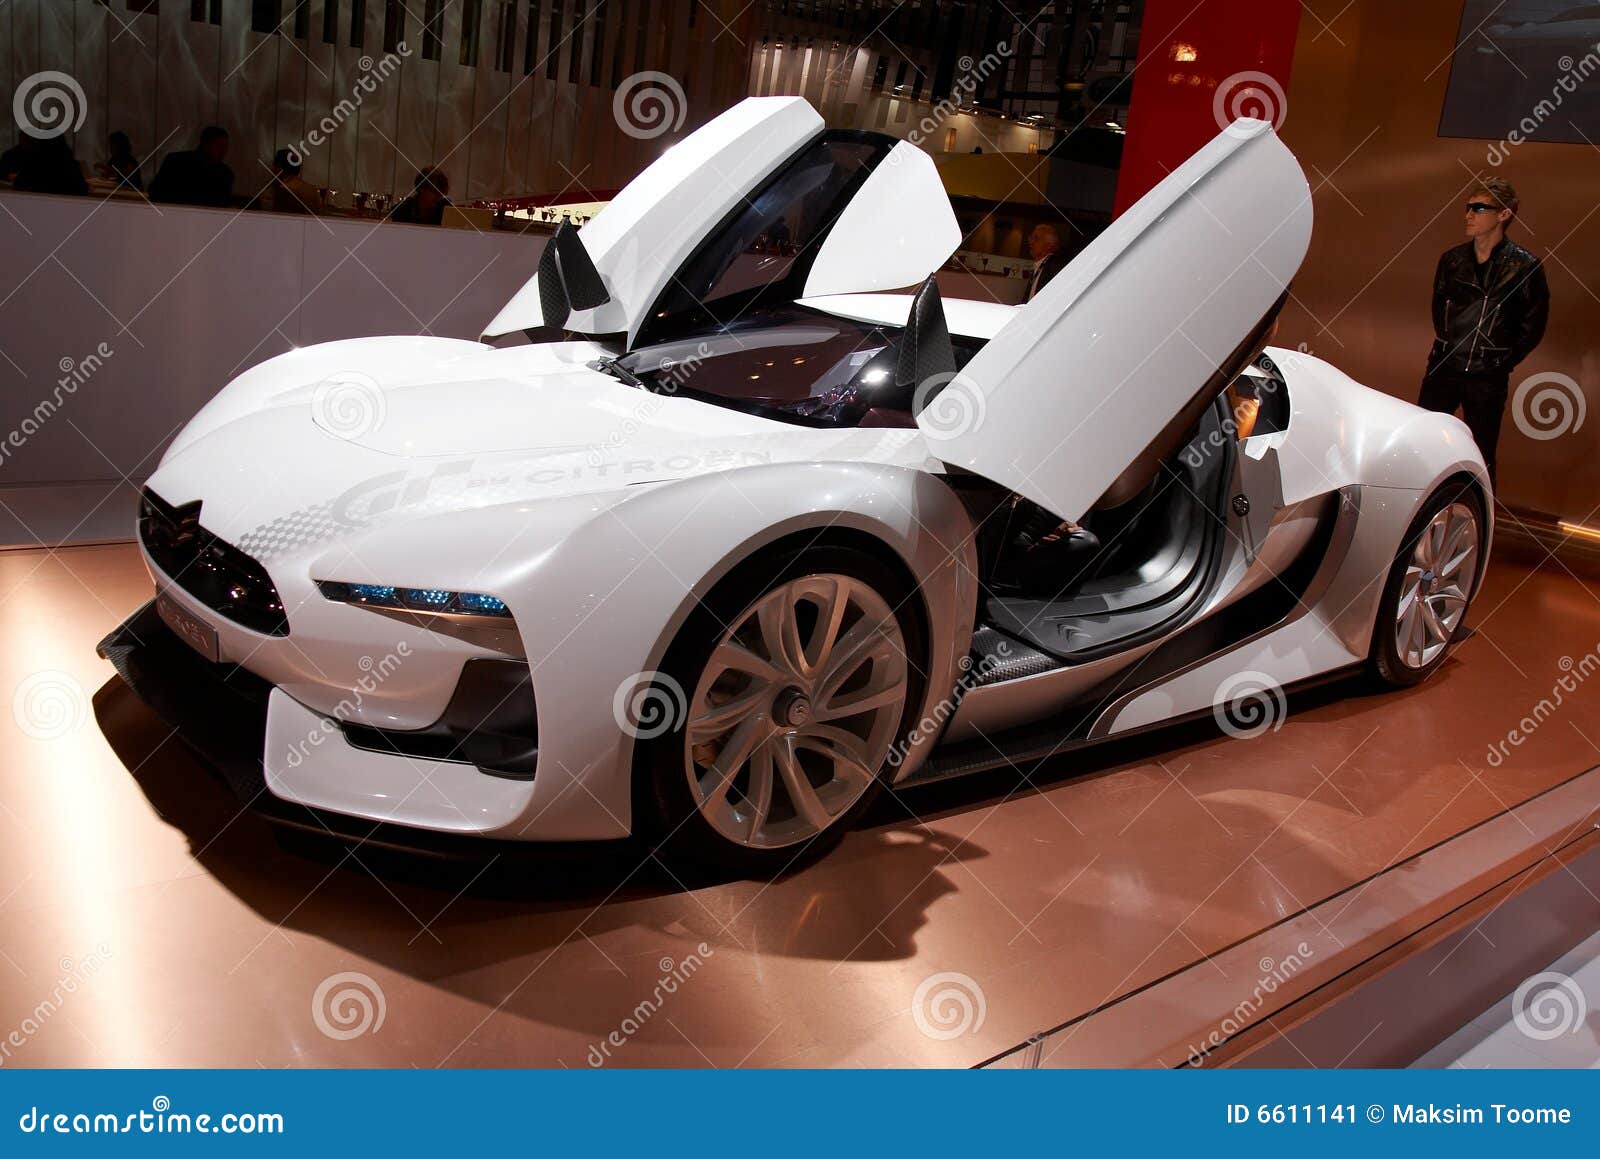 Citroen Gt Concept Editorial Photo Image Of Autoshow